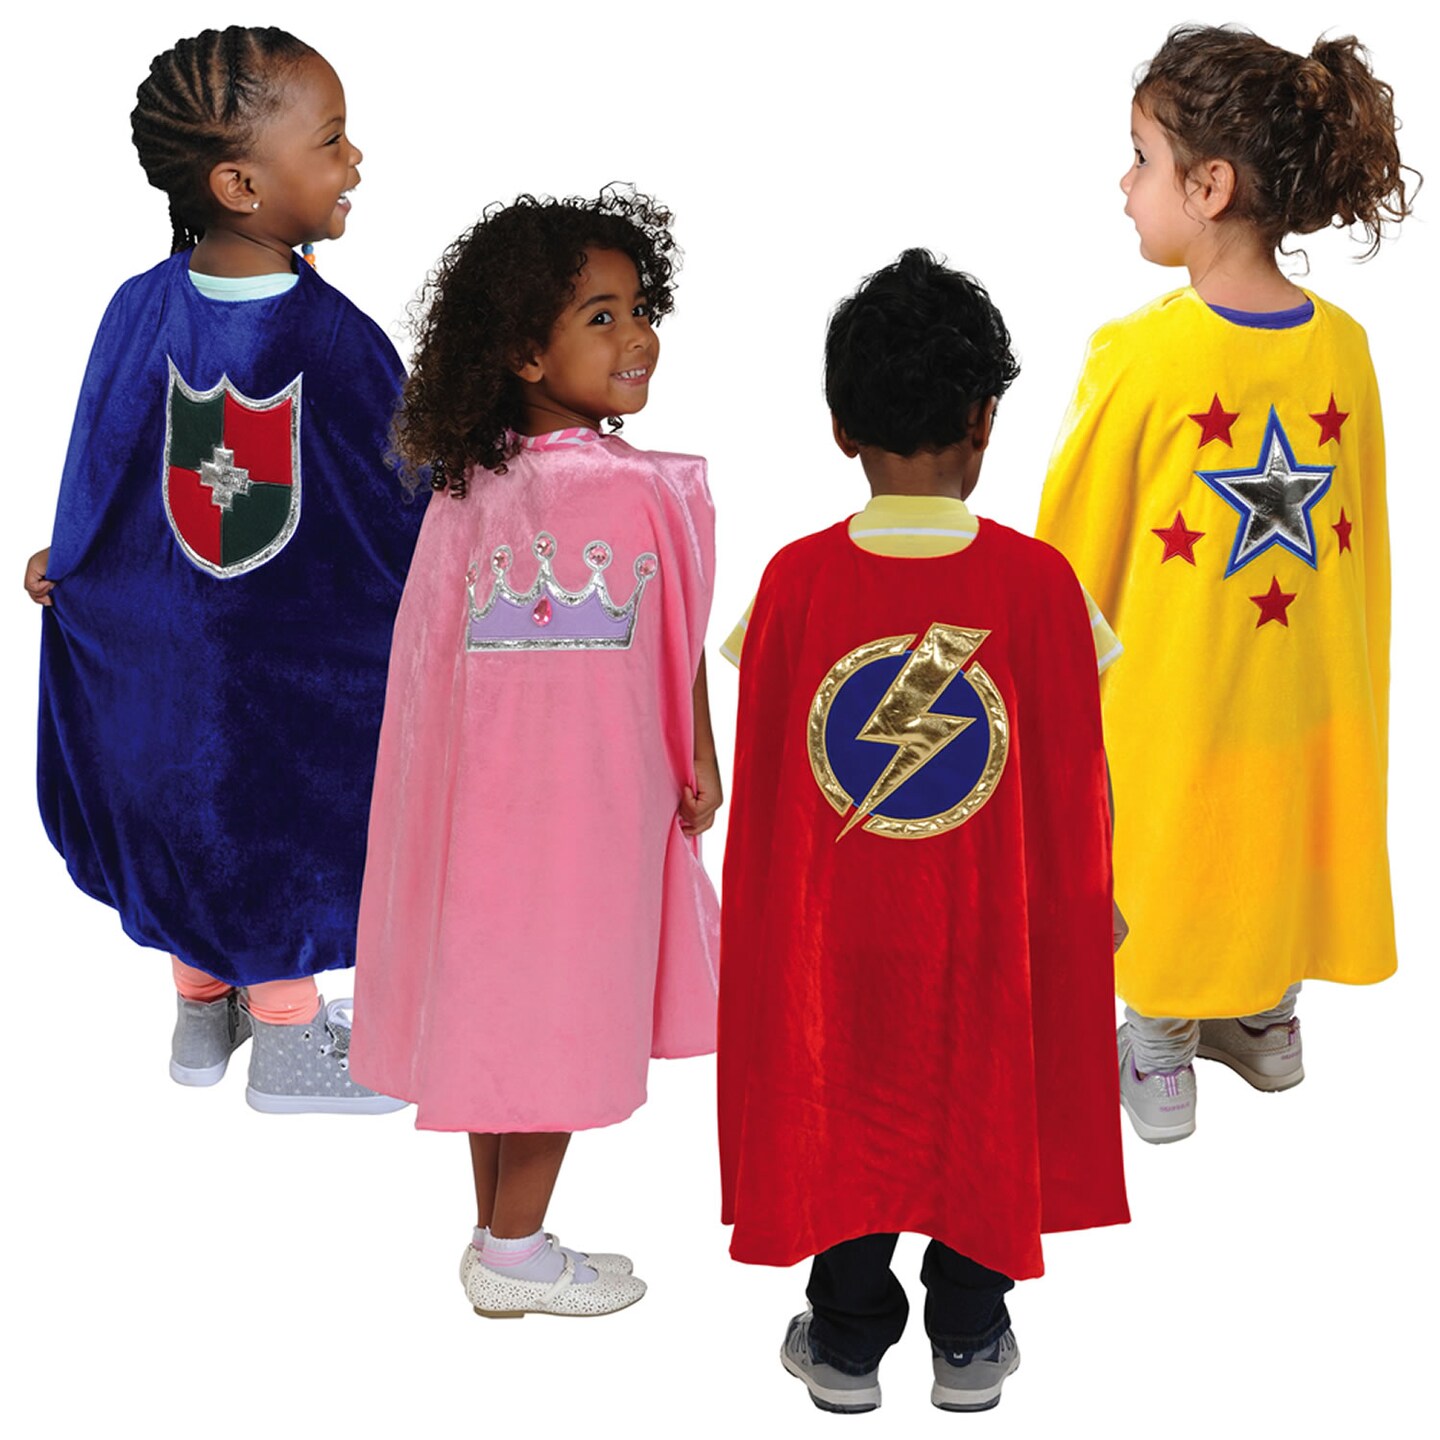 Kaplan Early Learning Company Pretend Play Adventure Capes - Set of 4